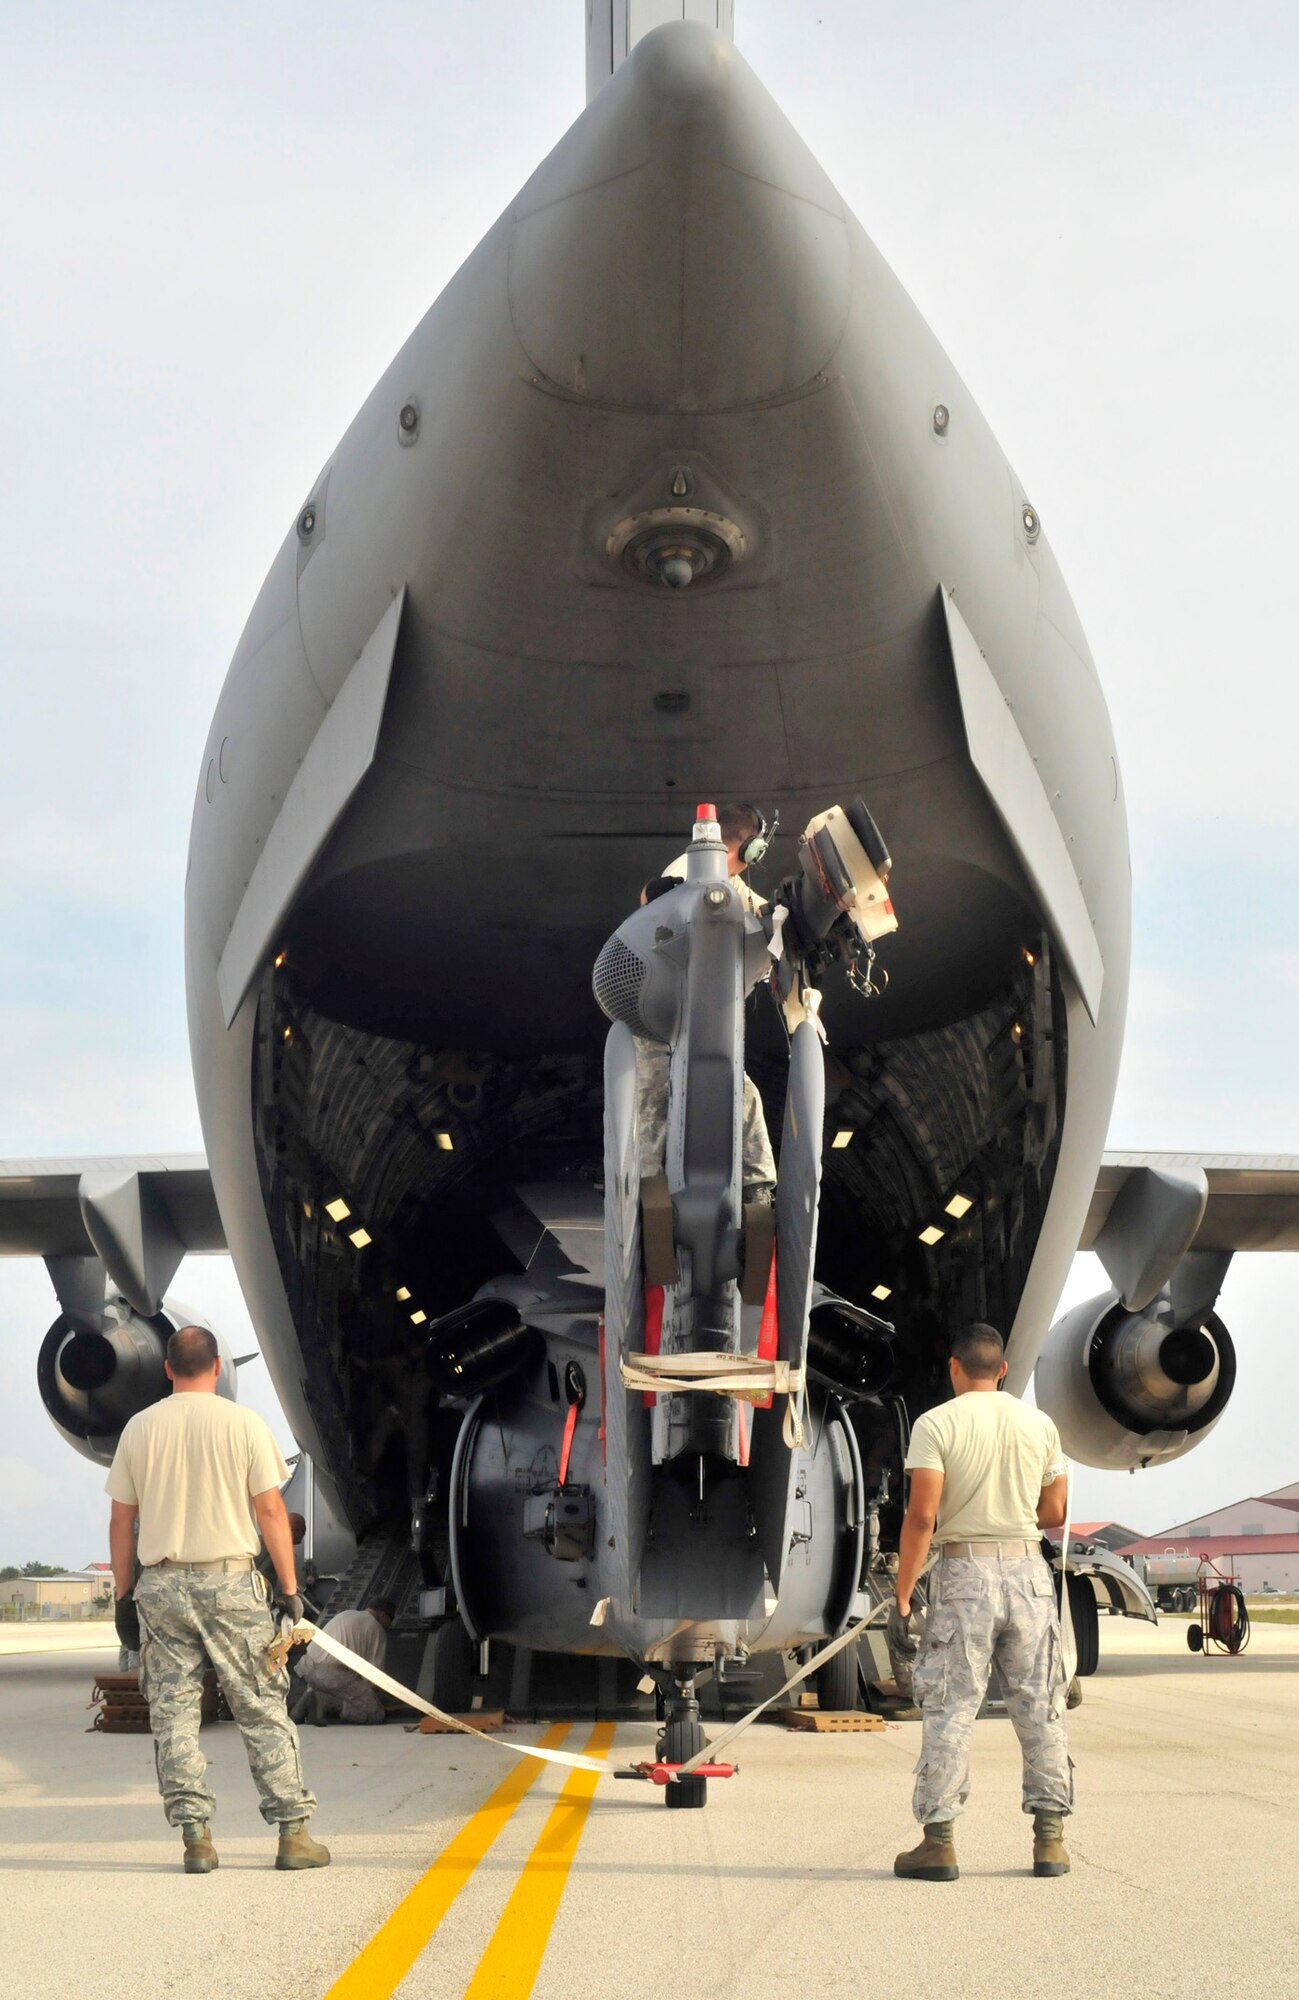 PATRICK AIR FORCE BASE, Fla.- Airmen from the 920th Rescue Wing Maintenance Group here help load a fixed-wing HH-60G Pave Hawk helicopter on a C-17 Globemaster III cargo aircraft. The C-17 is capable of rapid strategic delivery of troops and all types of cargo to main operating bases or directly to forward bases in the deployment area. (U.S. Air Force photo/Airman First Class Natasha Dowridge)